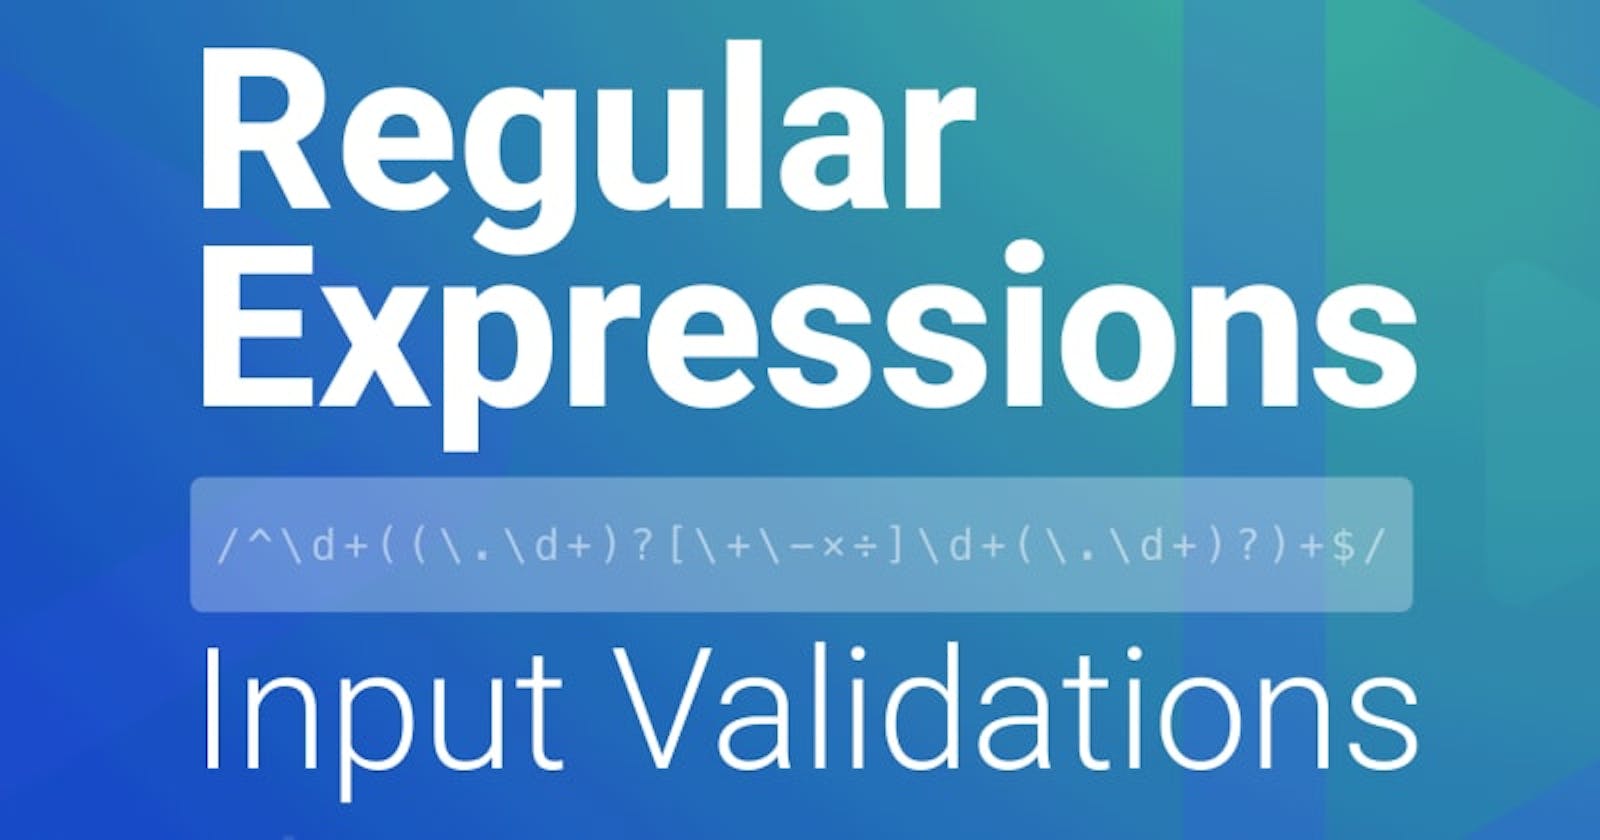 Regular Expressions and Input Validation